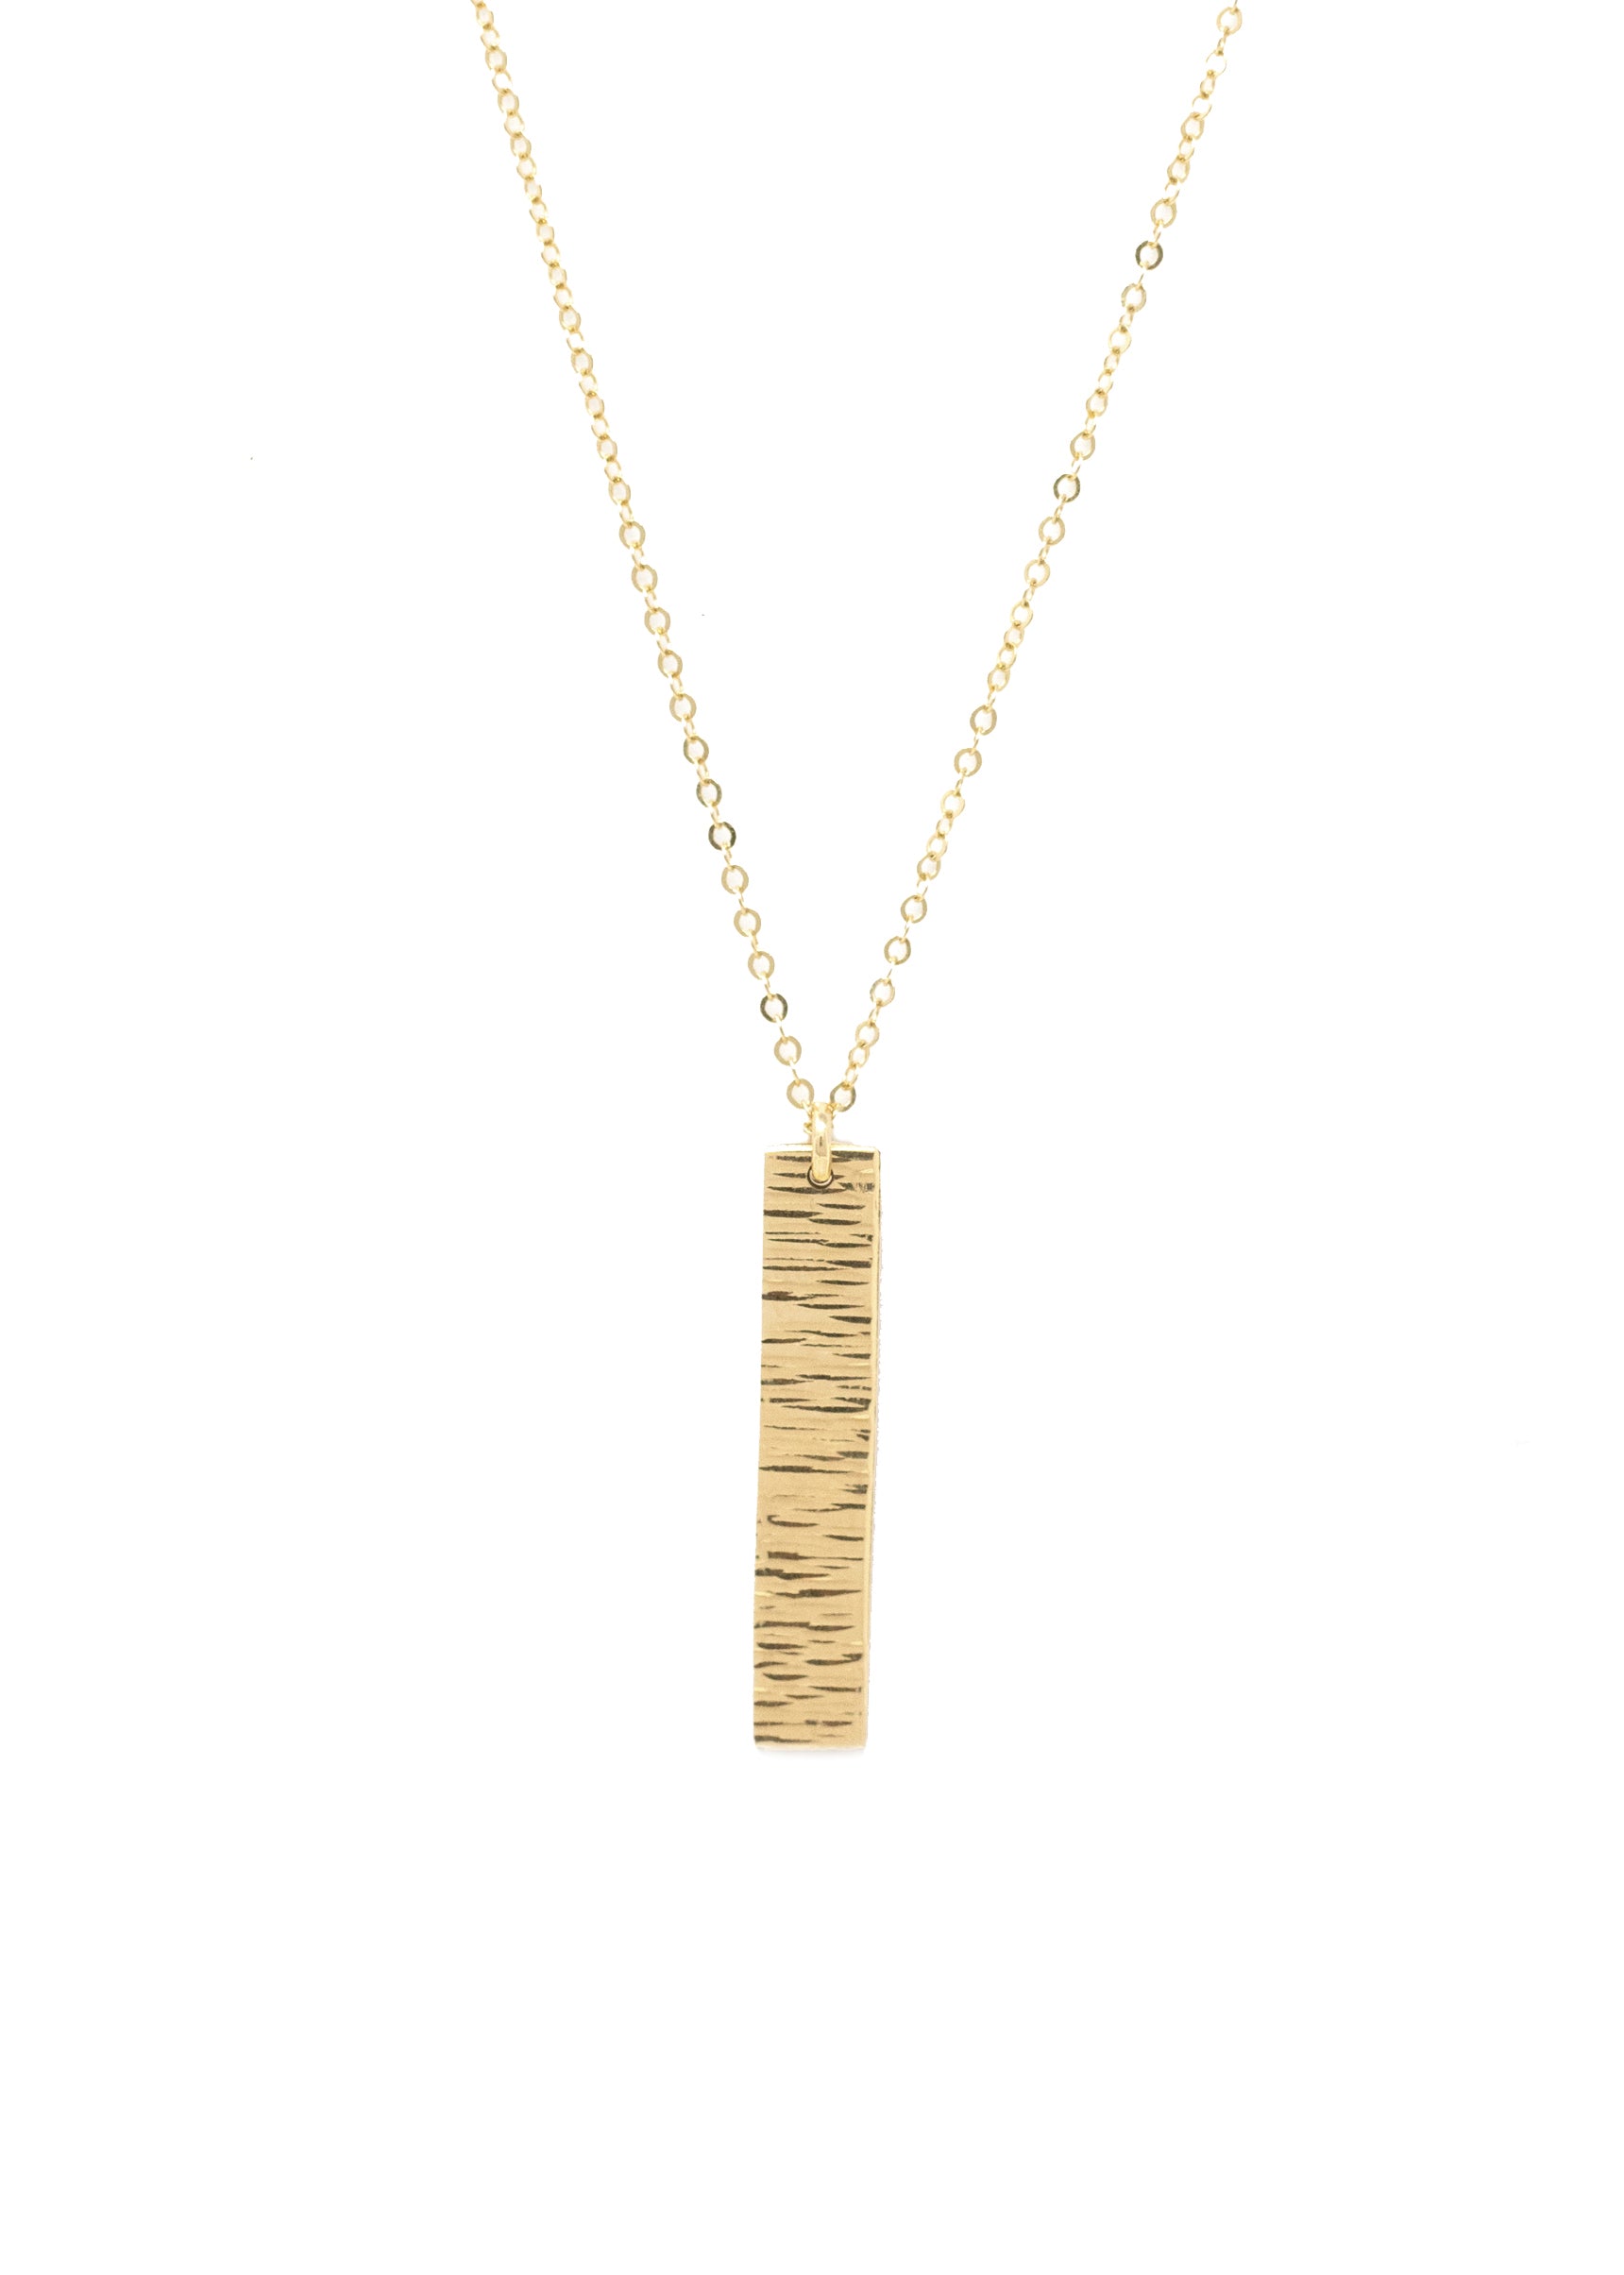 Able Jewelry Luxe Citadel Necklace